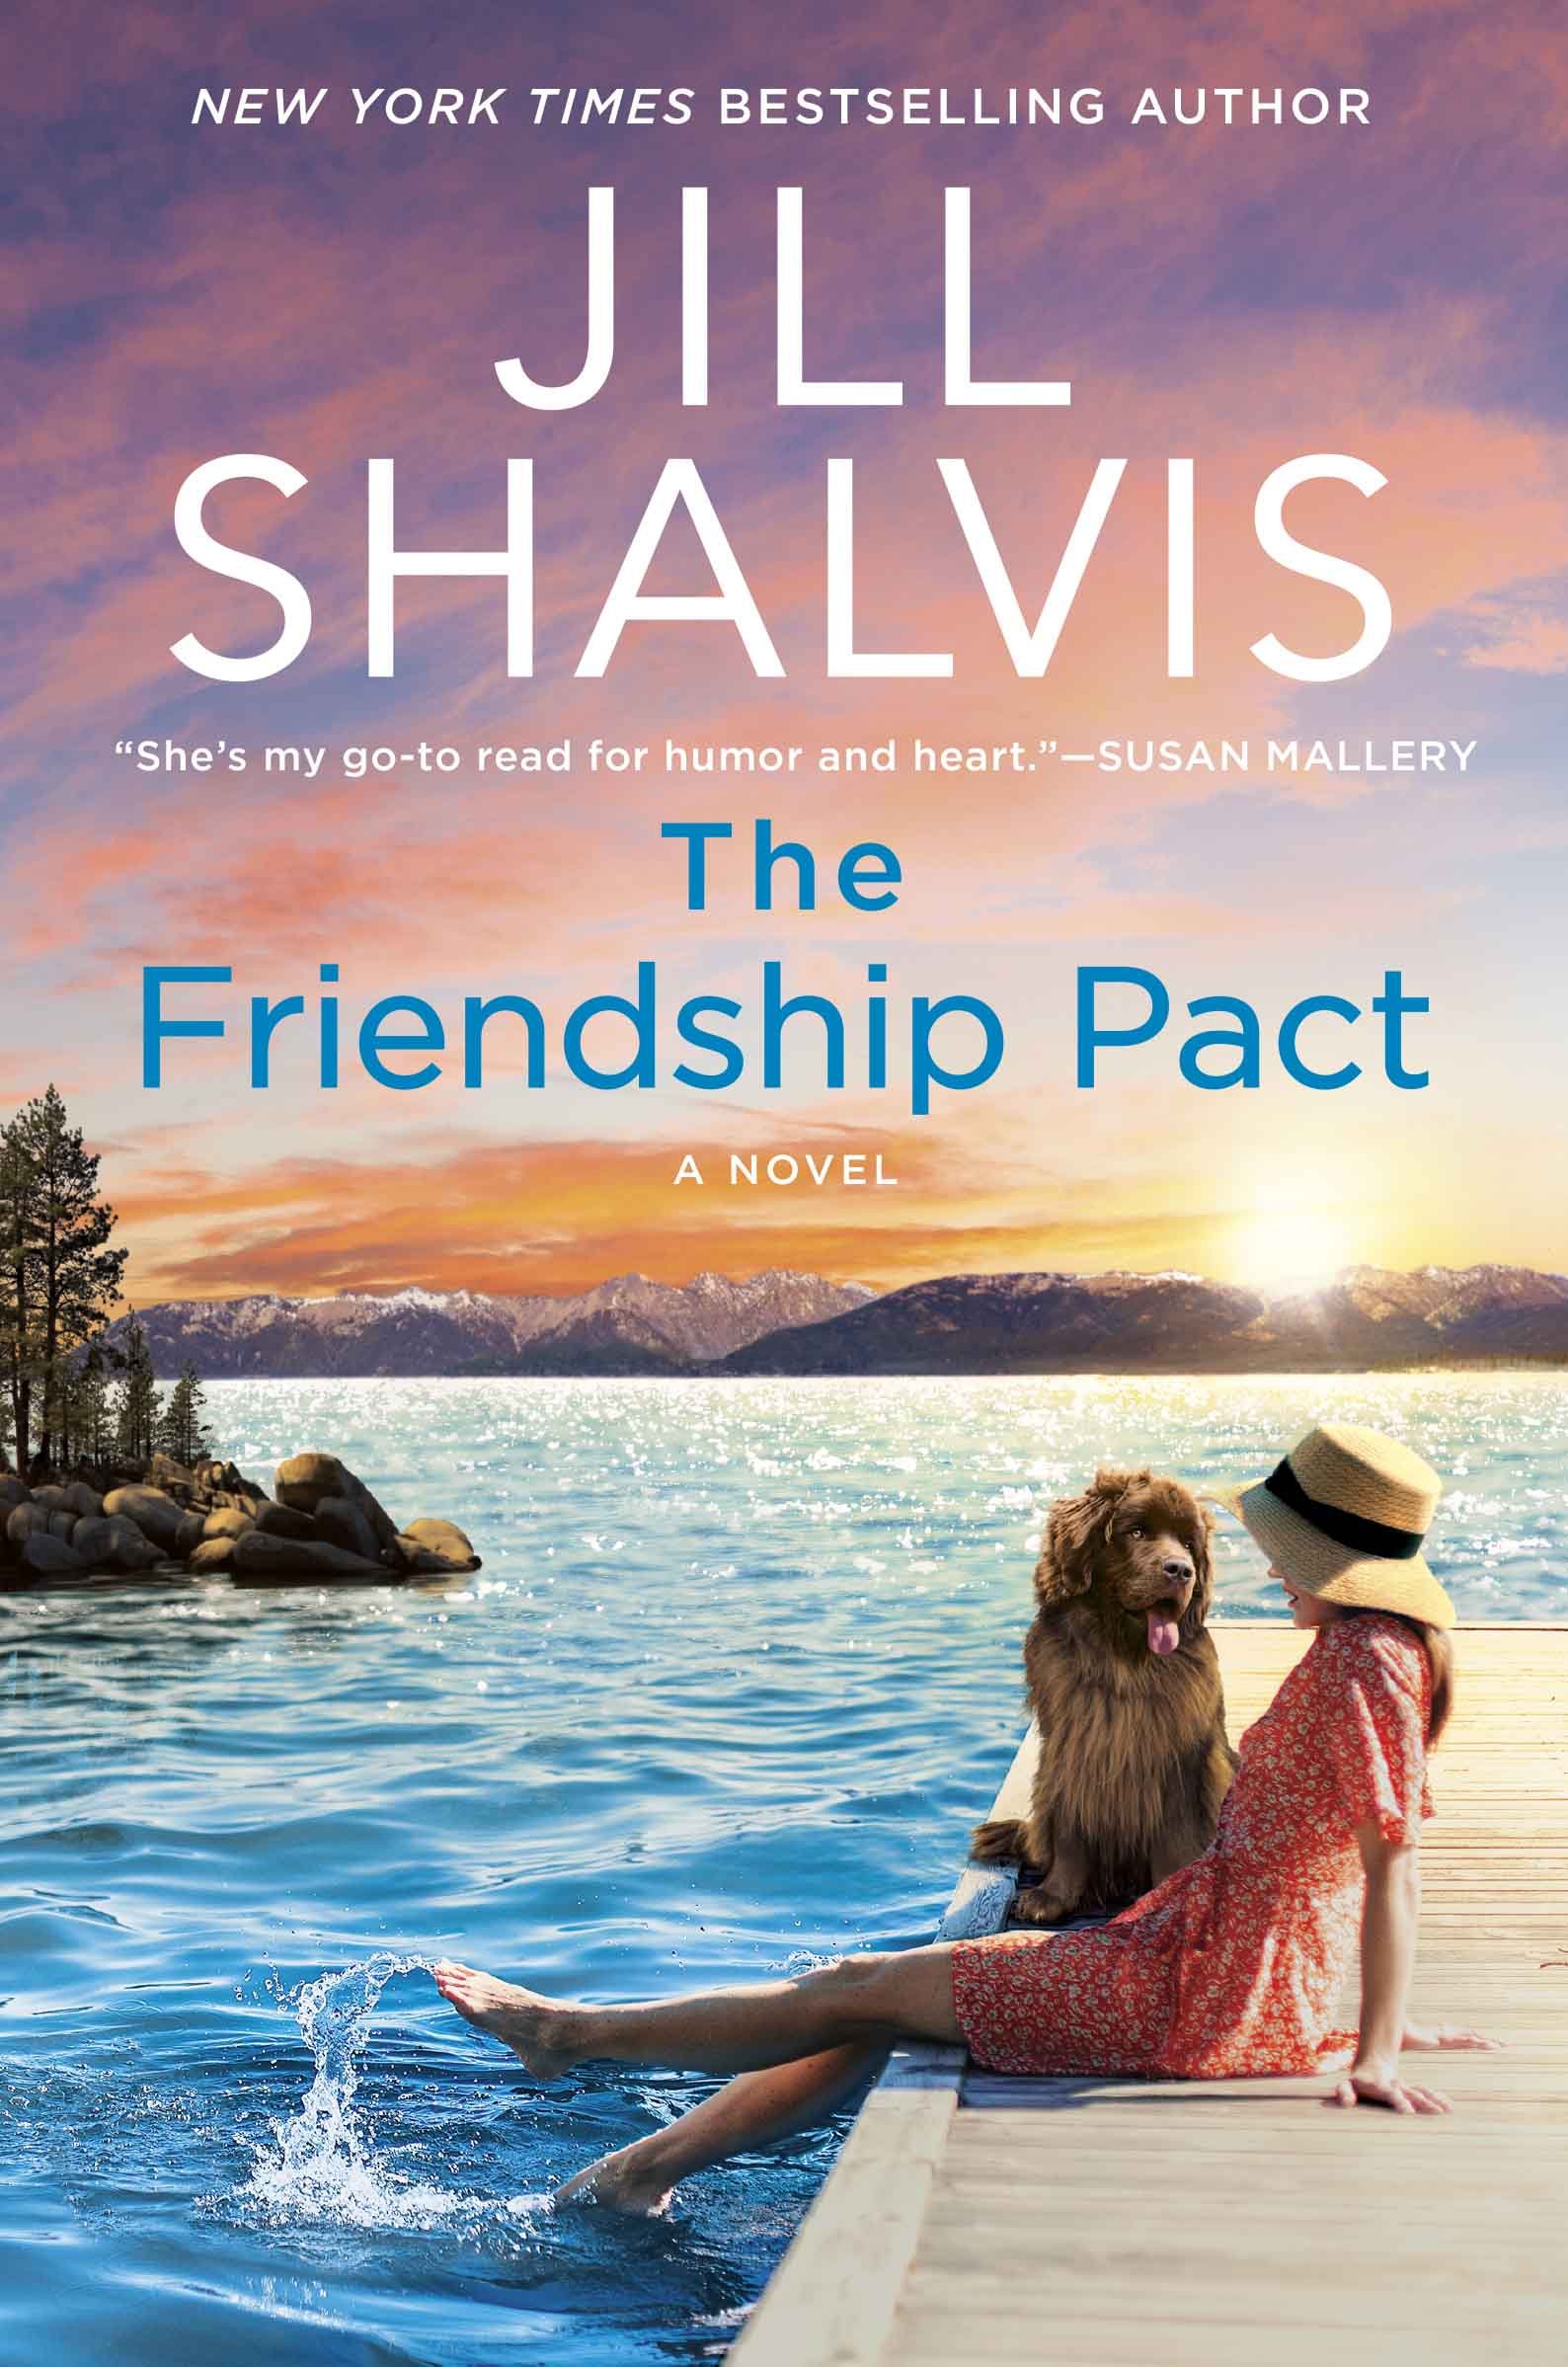 Image for "The Friendship Pact"